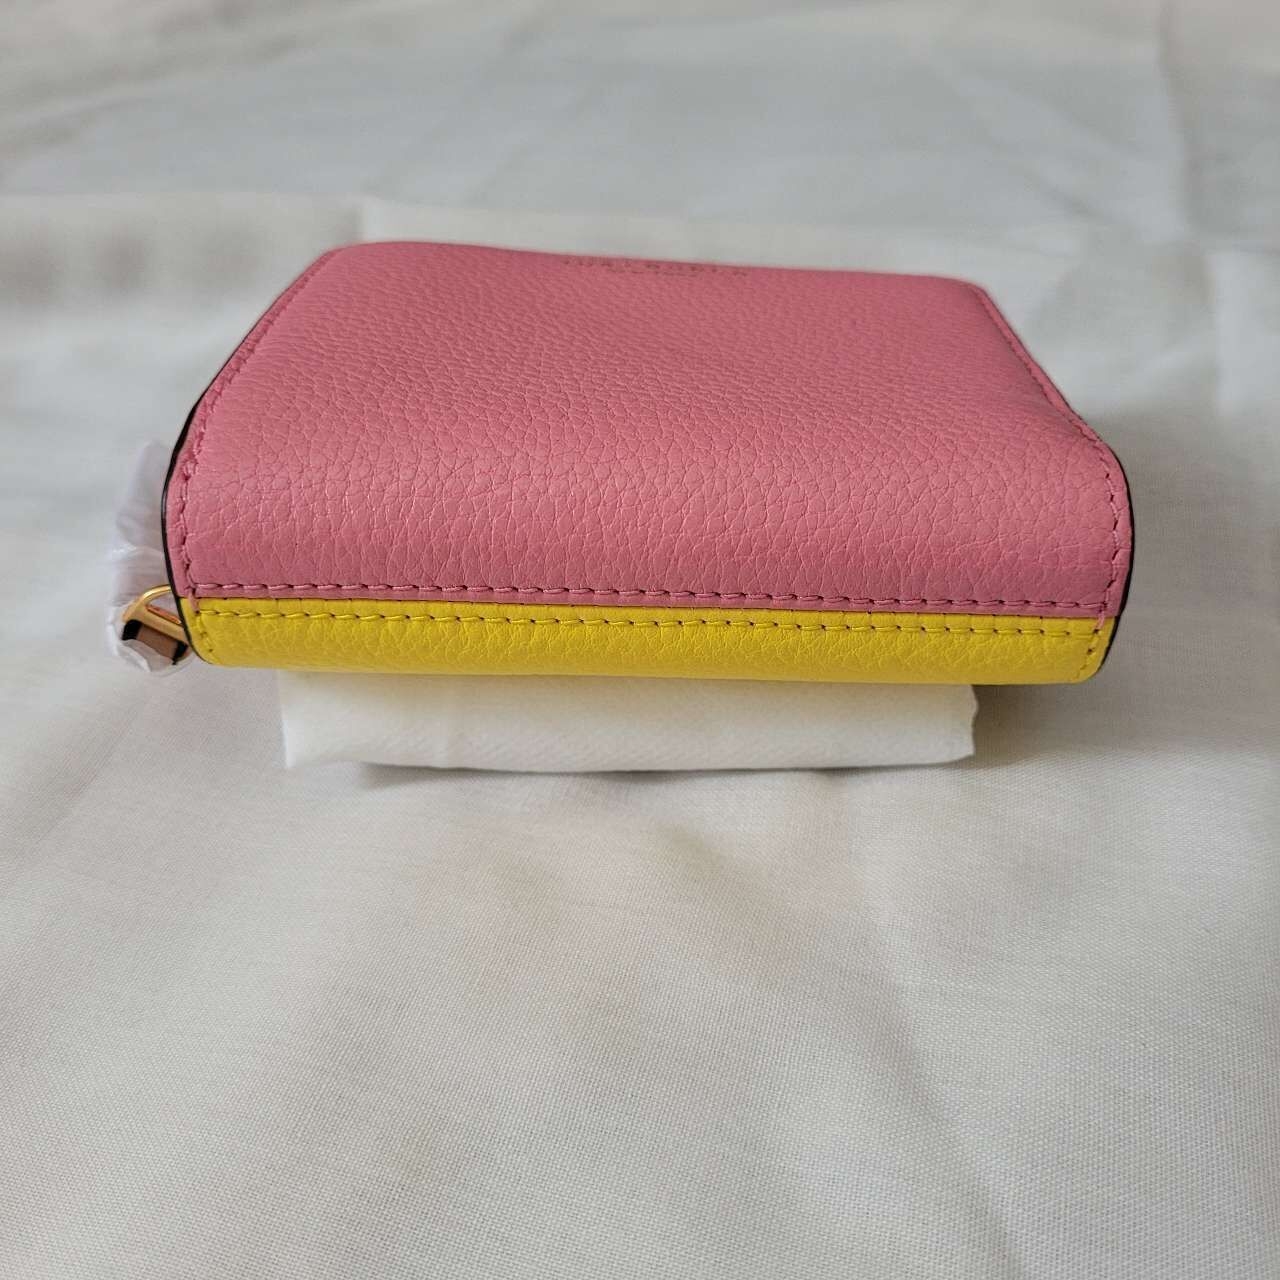 Tory Burch Perry Colorblock Bifold Wallet Pink-Yellow